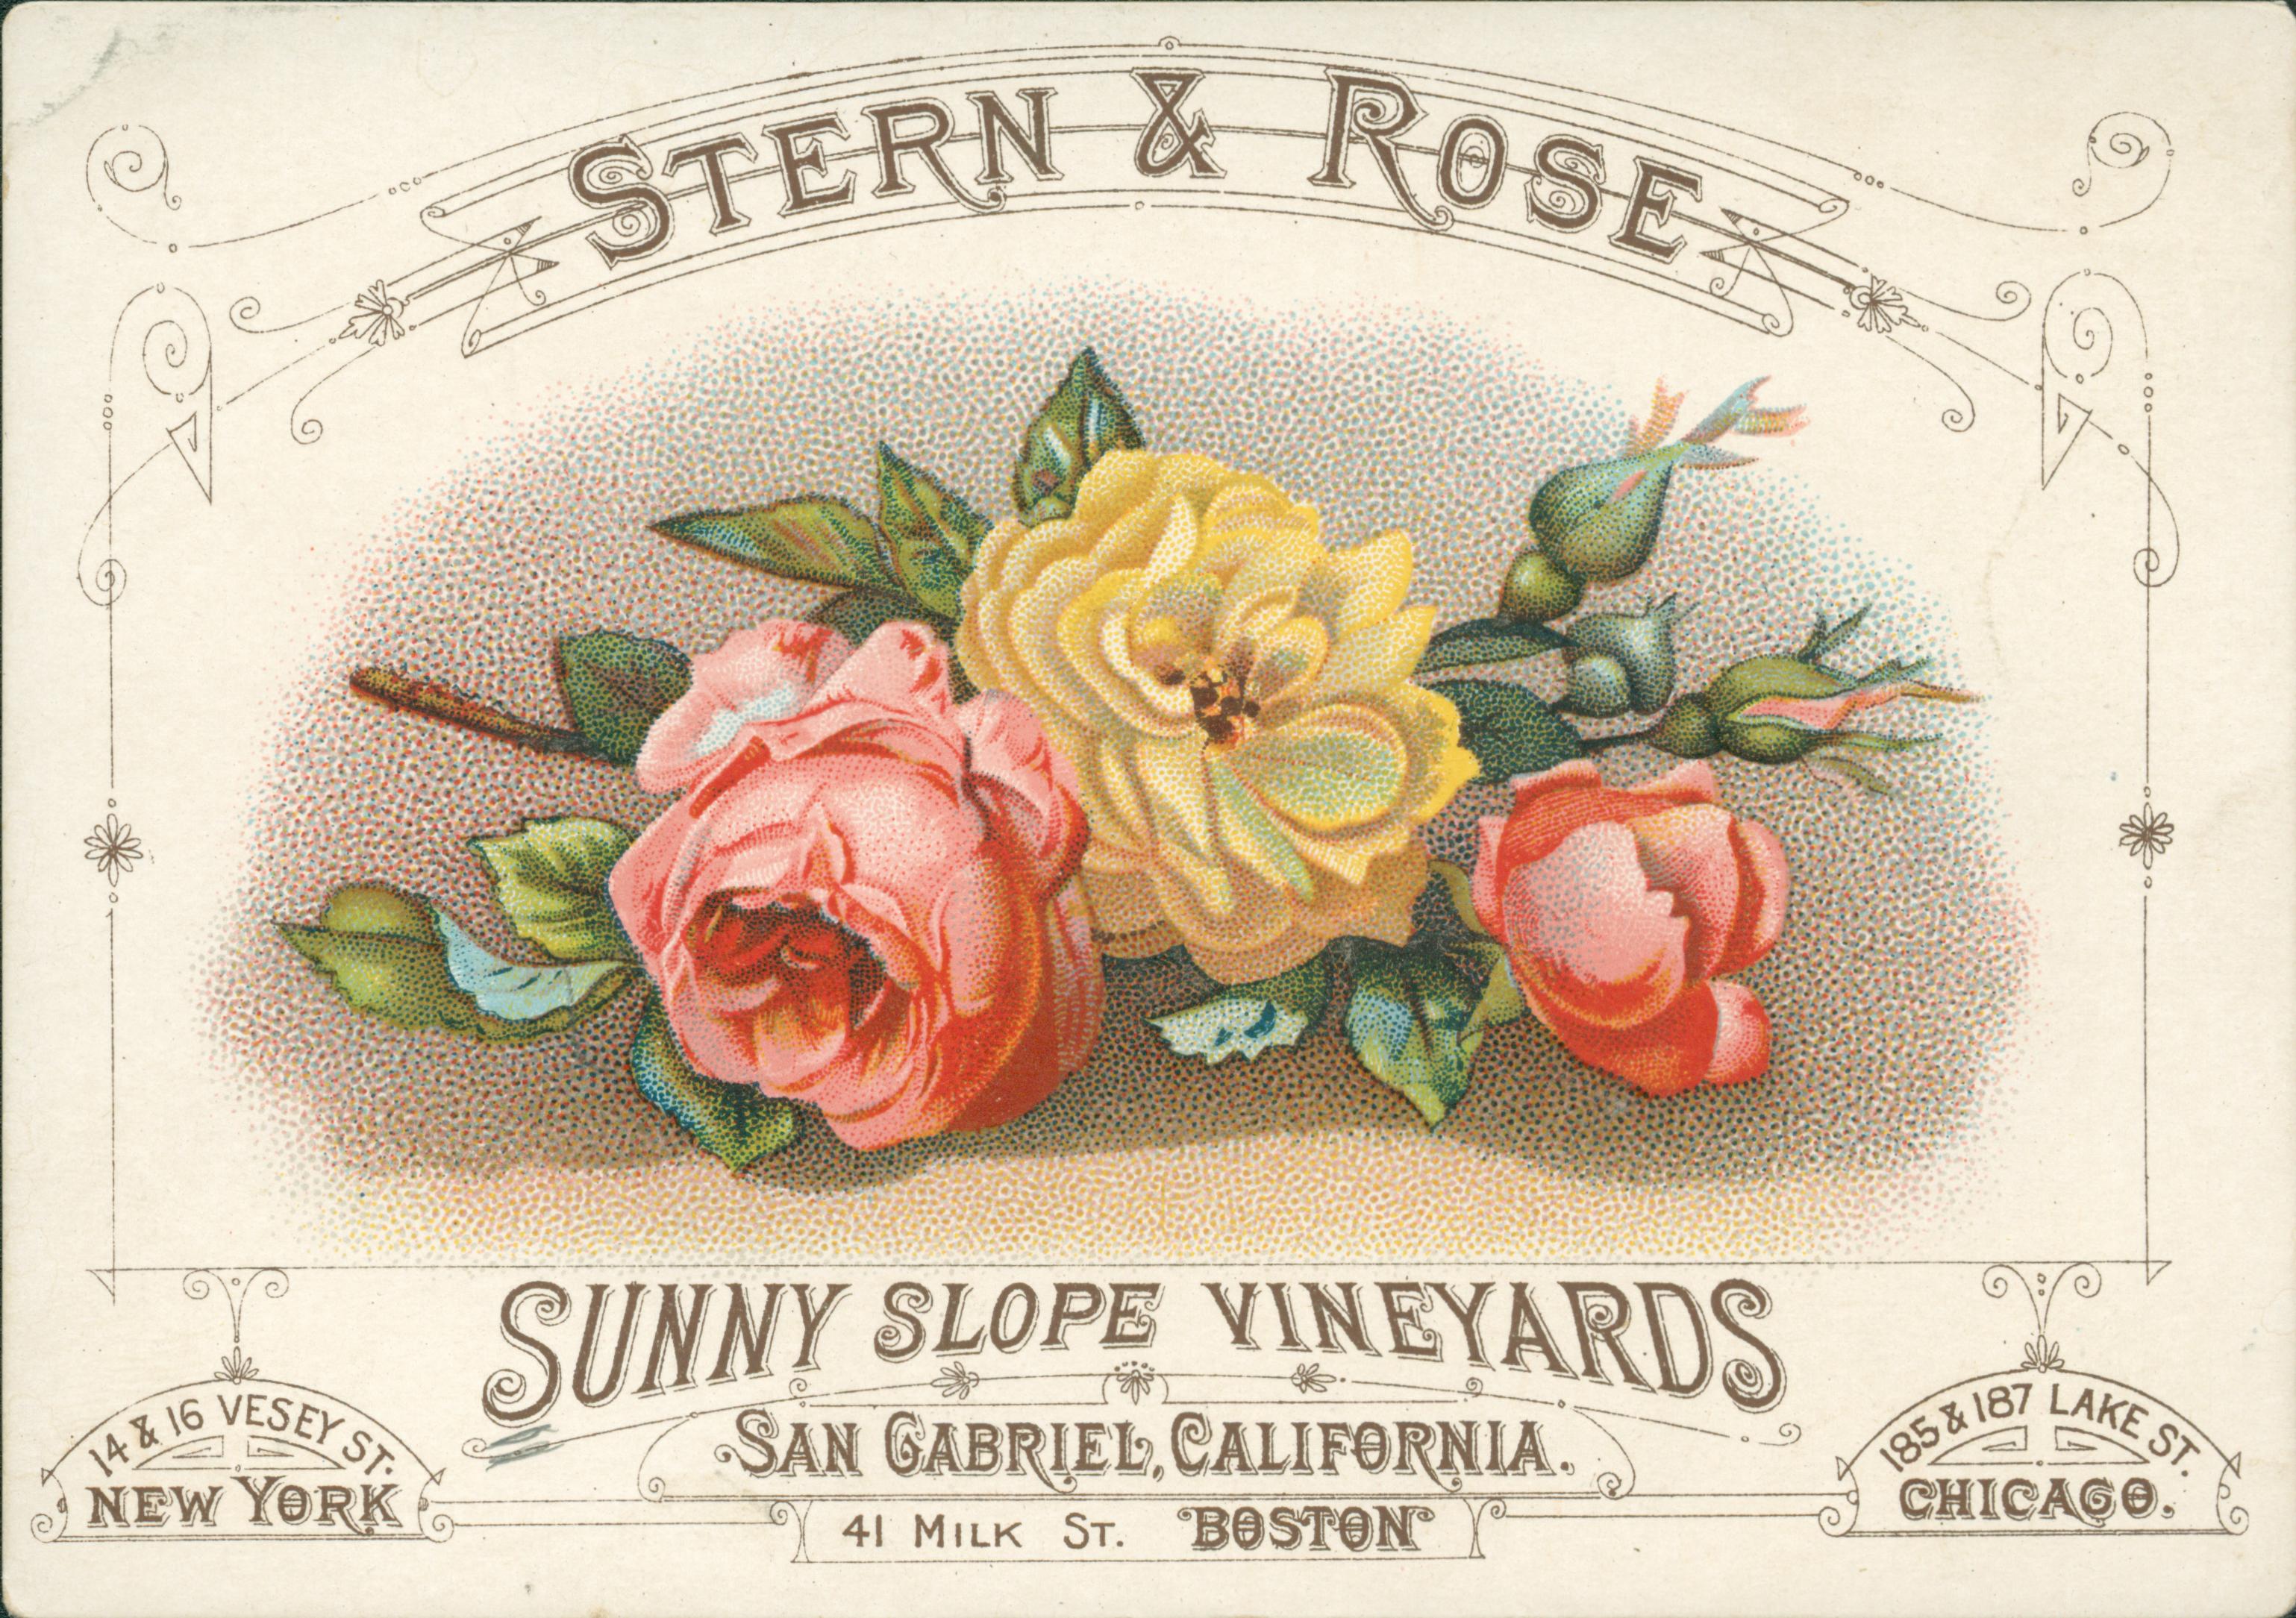 This trade card shows three roses in bloom with information about the company above and below.